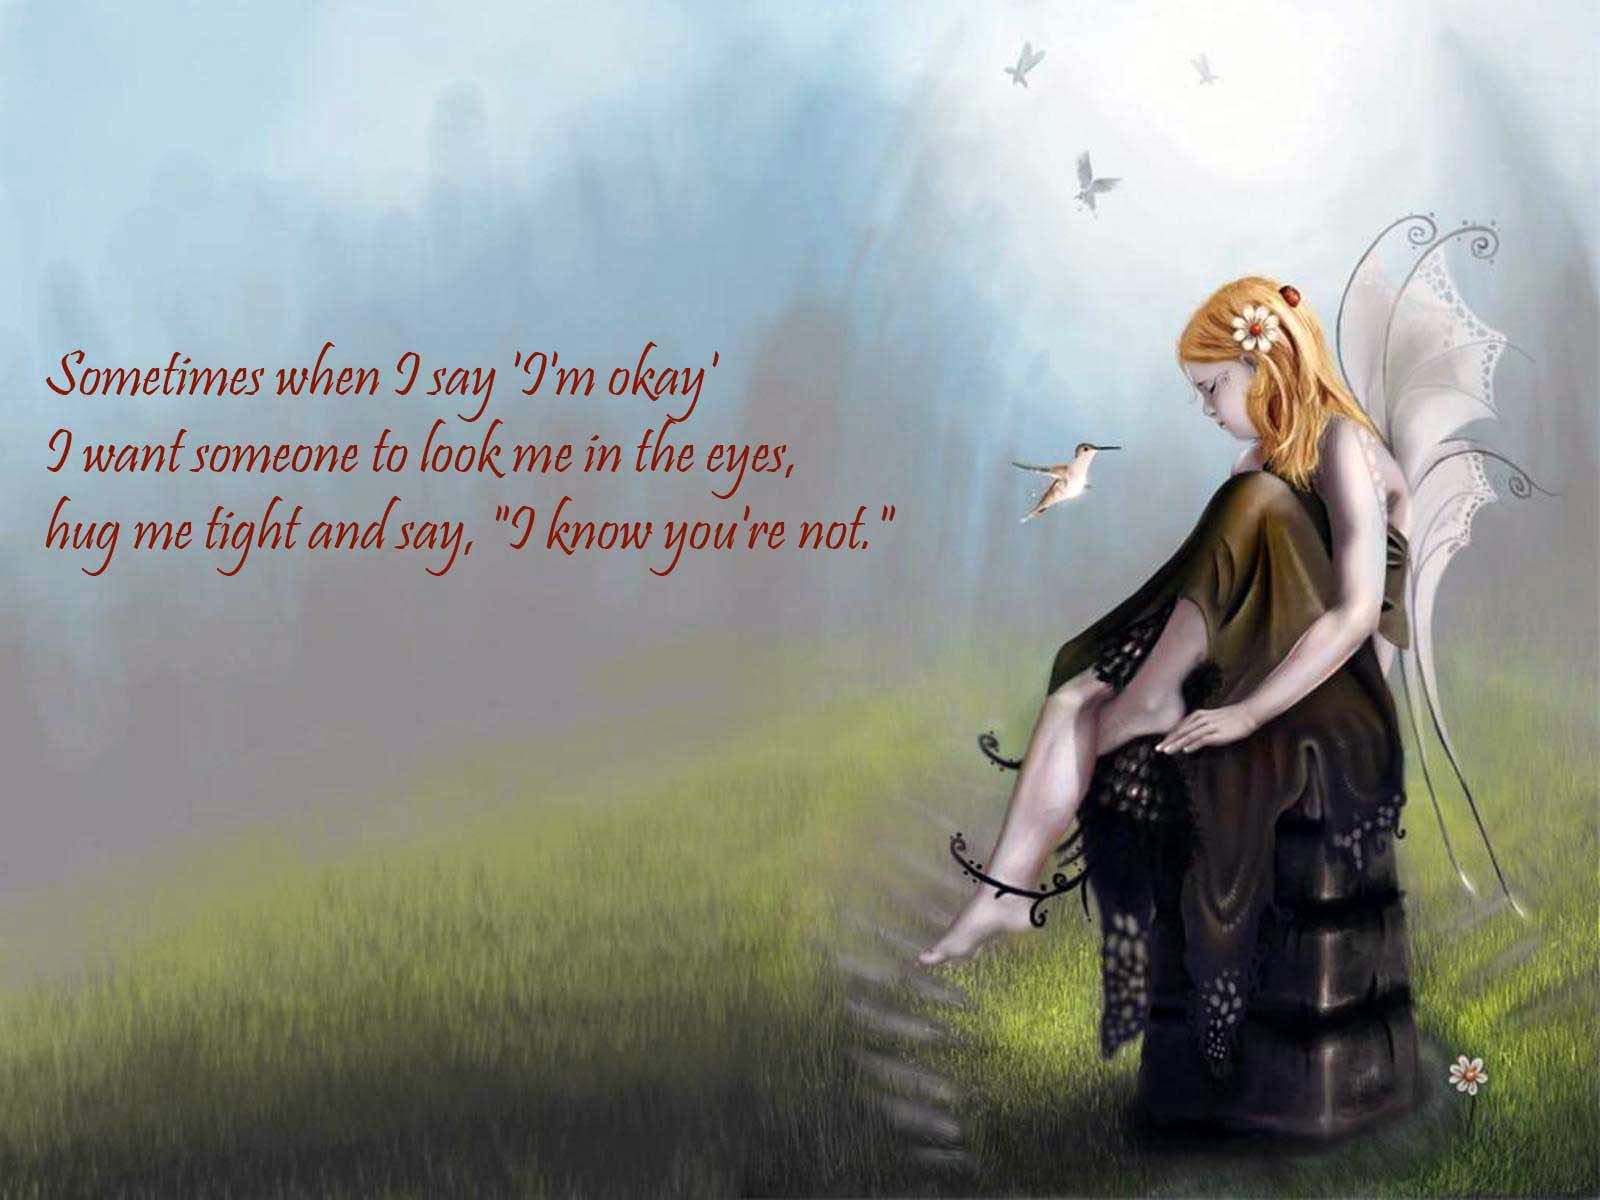 Doll Girls - Thinking Of You Loss Of Son - HD Wallpaper 